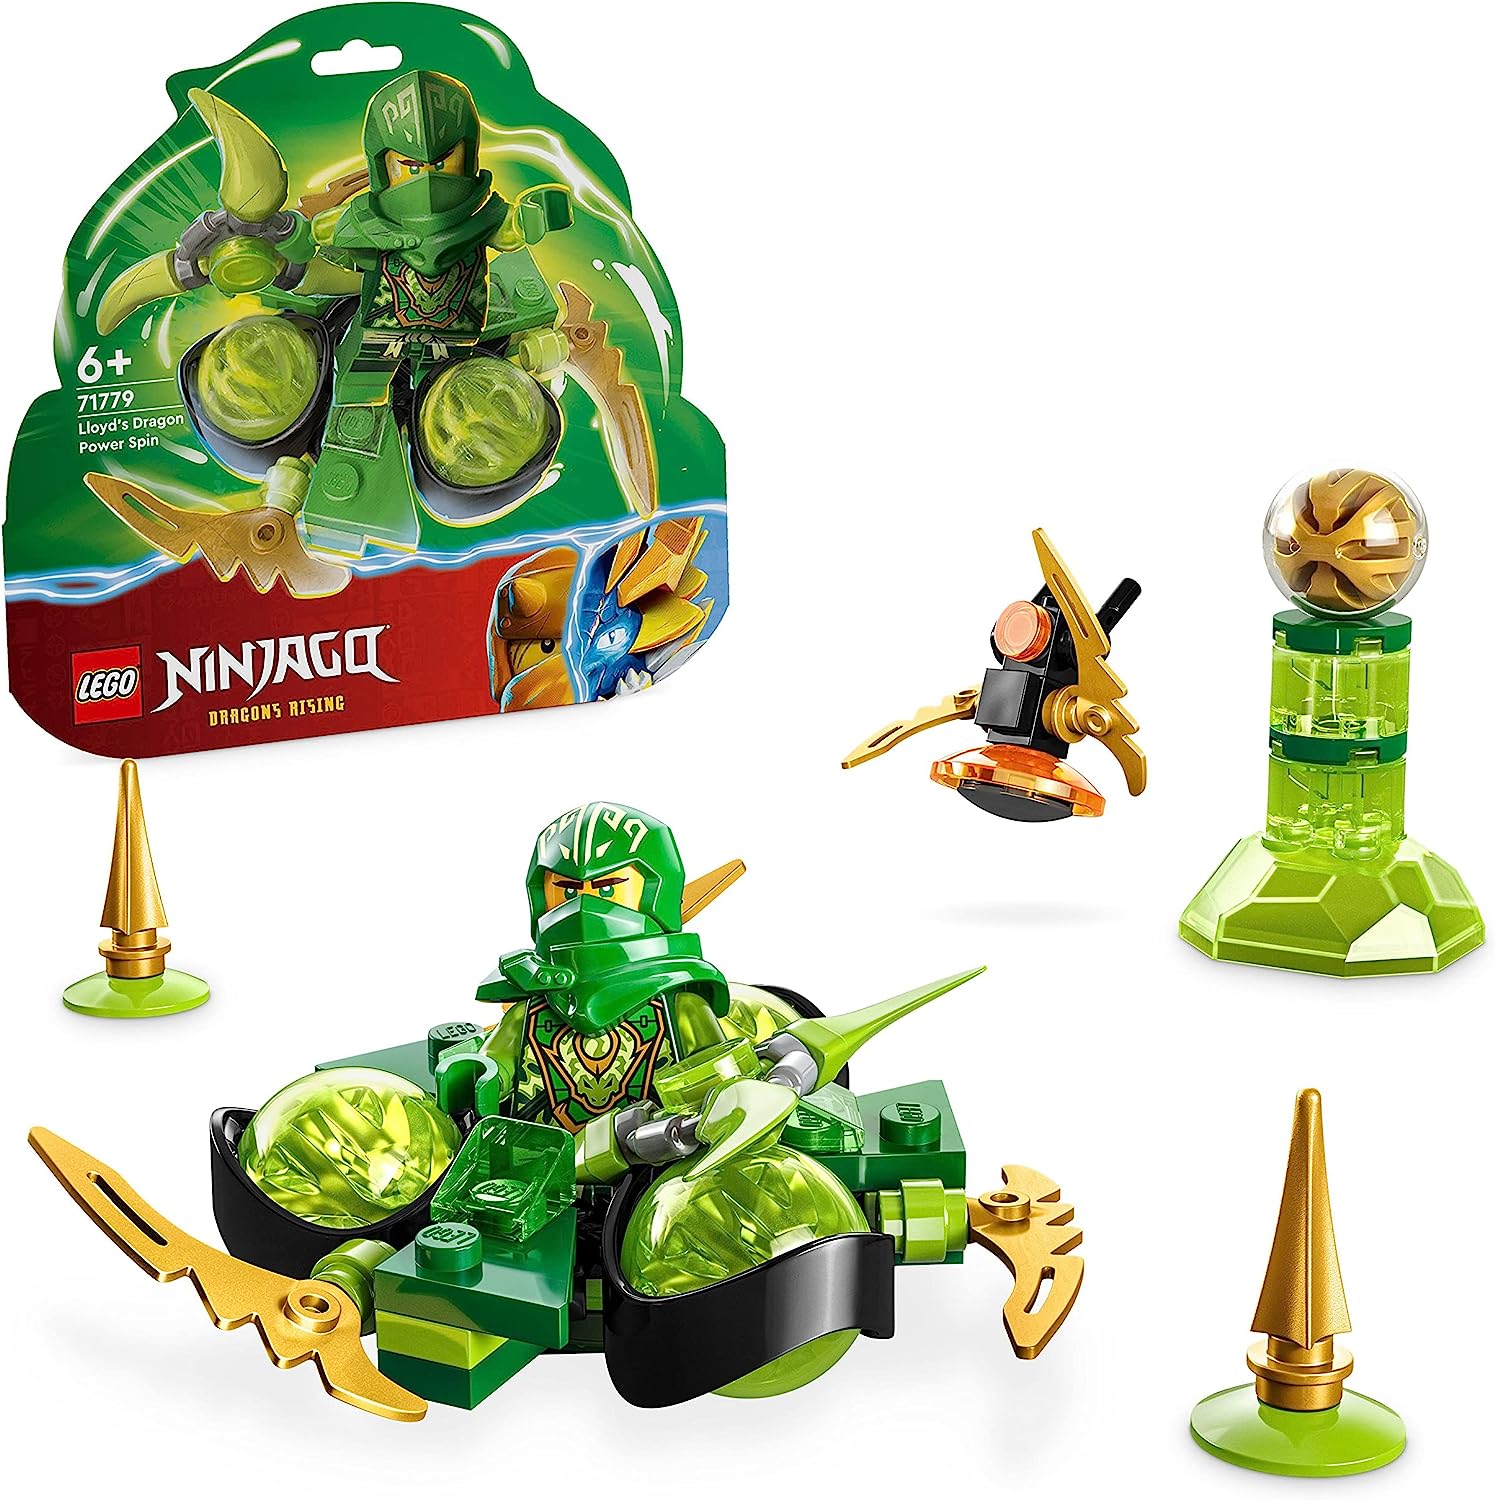 LEGO 71779 Ninjago Lloyds Dragon Power Spinjitzu Spin Toy, Spinner with Art Pieces, Lloyd Mini Figure to Collect, Small Gift for Children from 6 Years